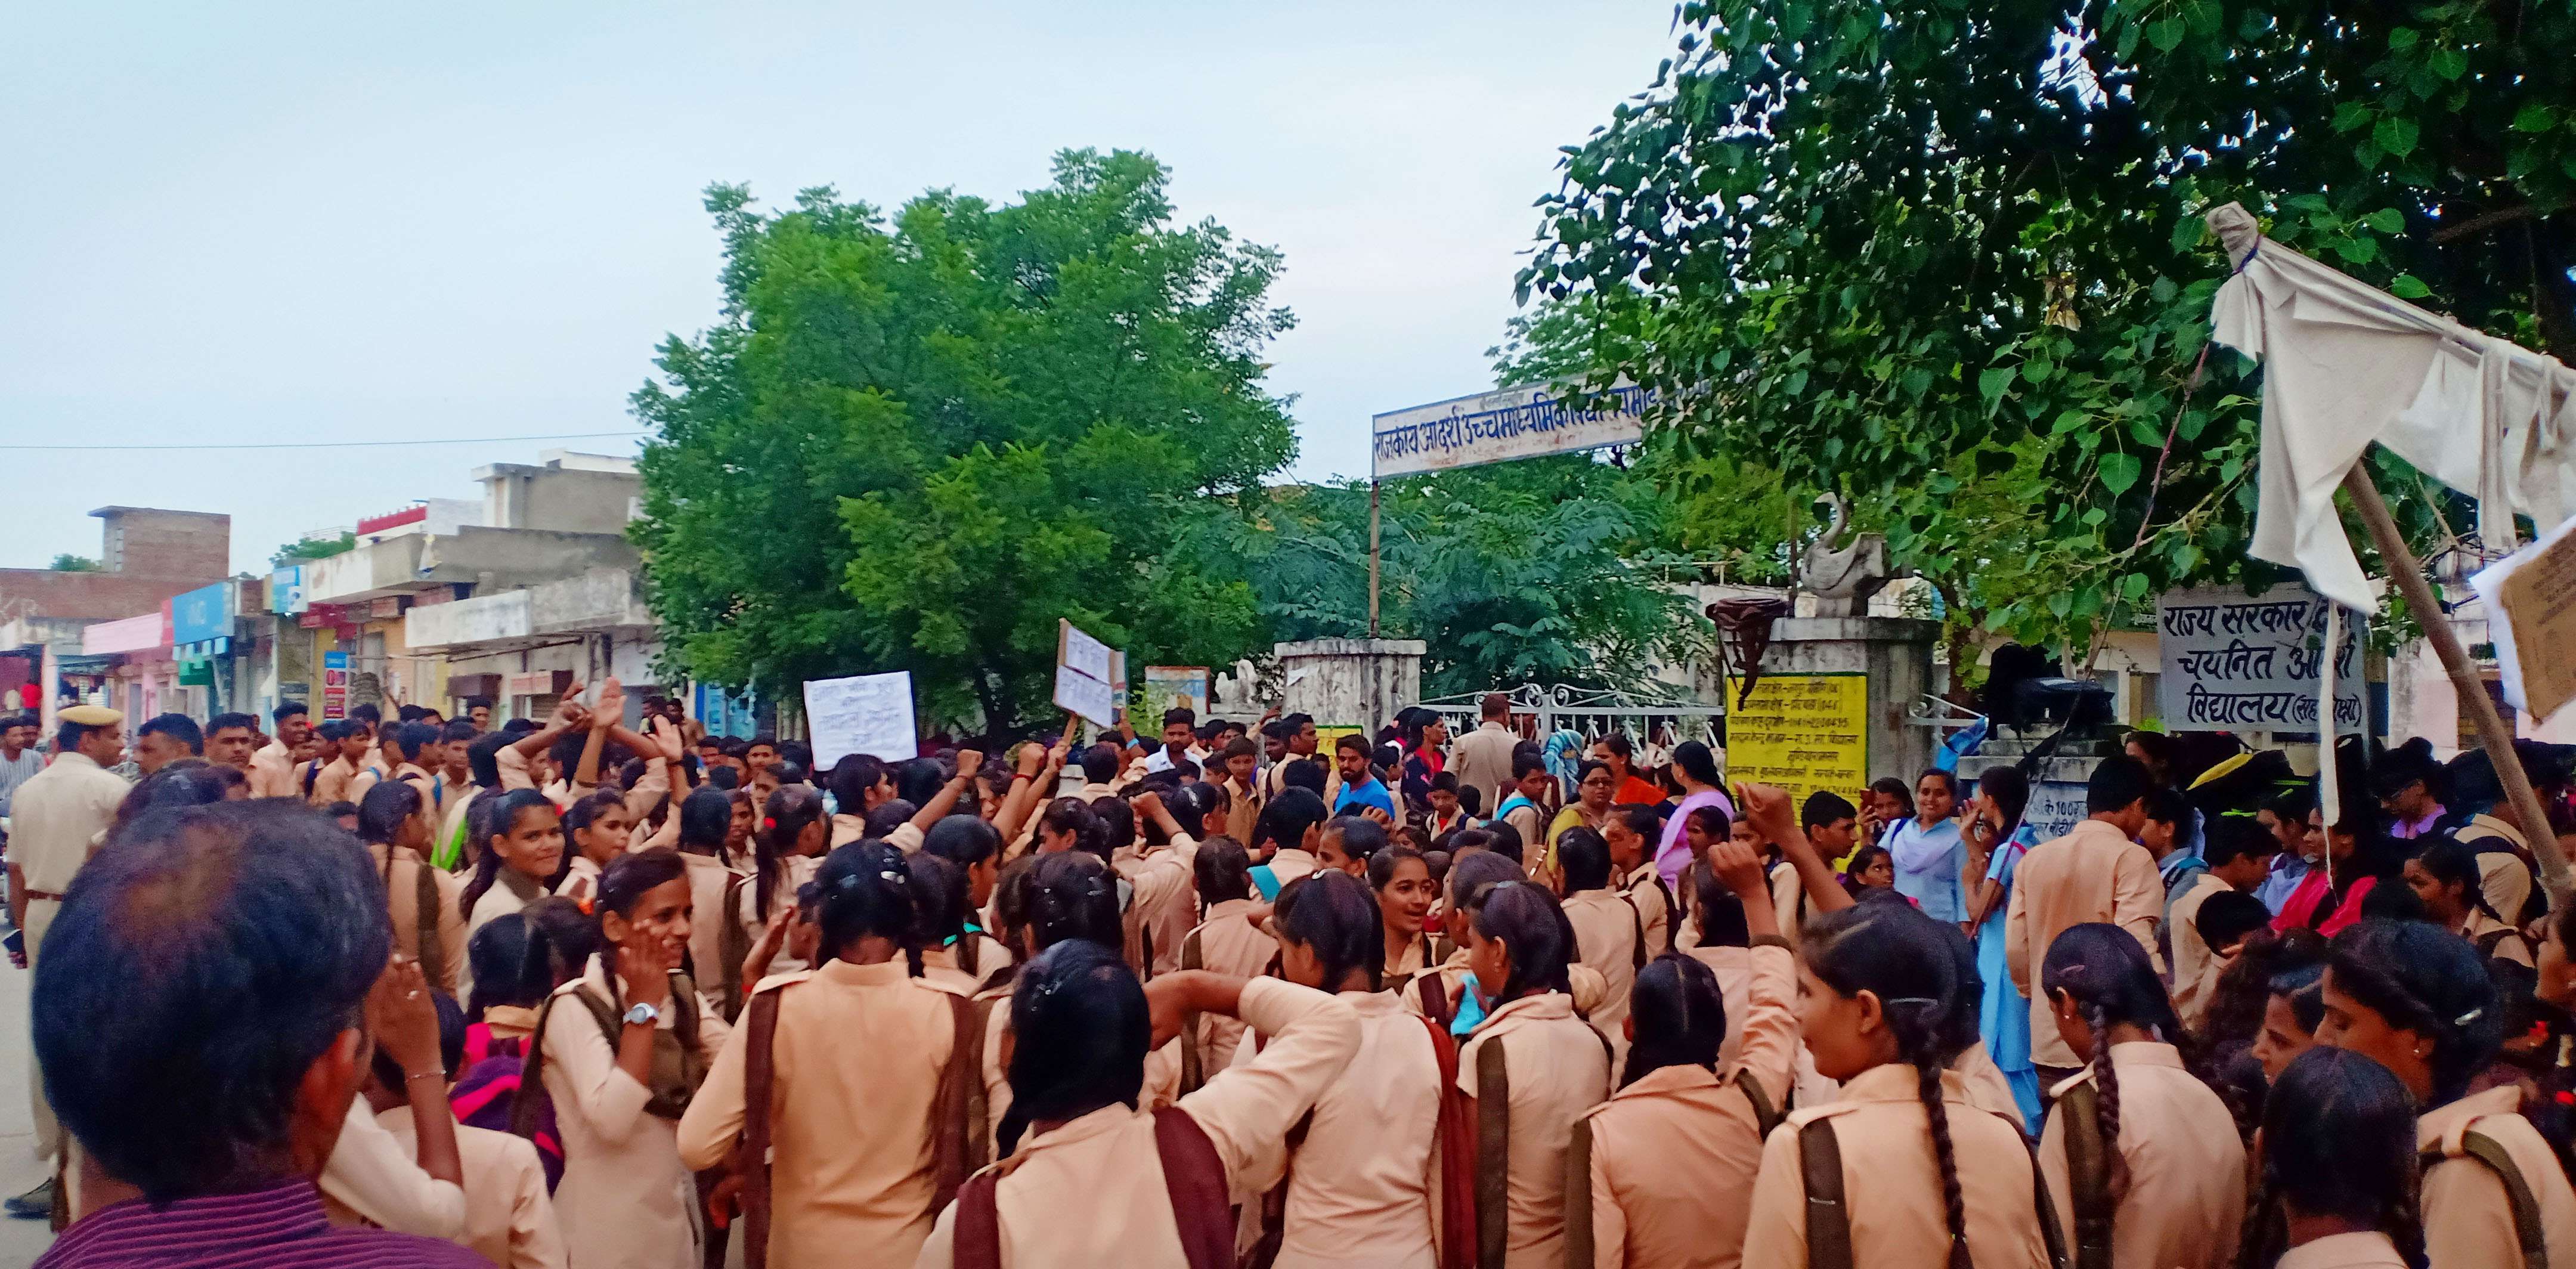 students angry due to transfer : Students lock school